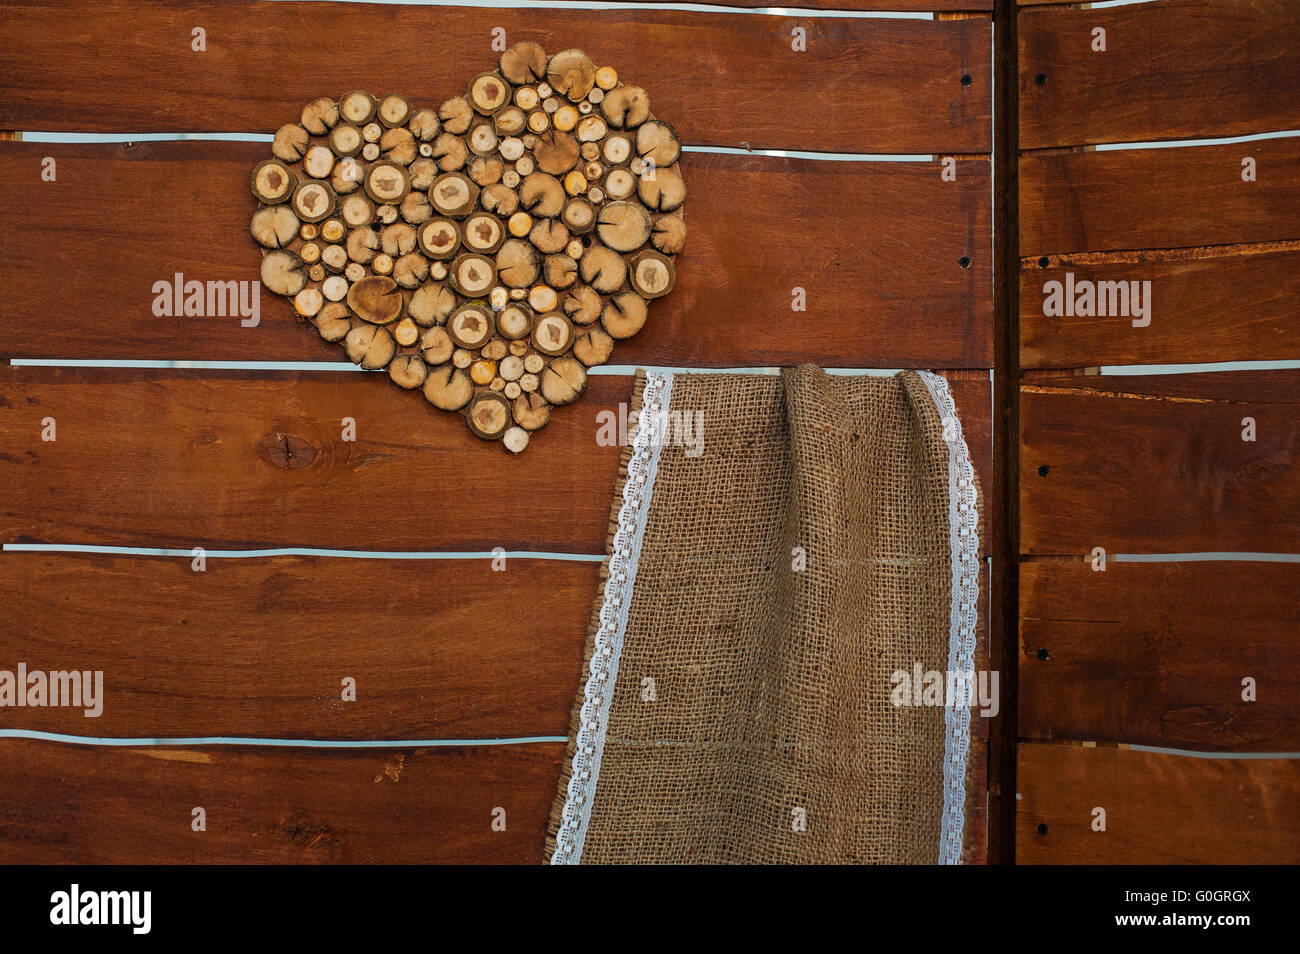 Original wedding decoration in form of wooden heart for ceremony Stock Photo